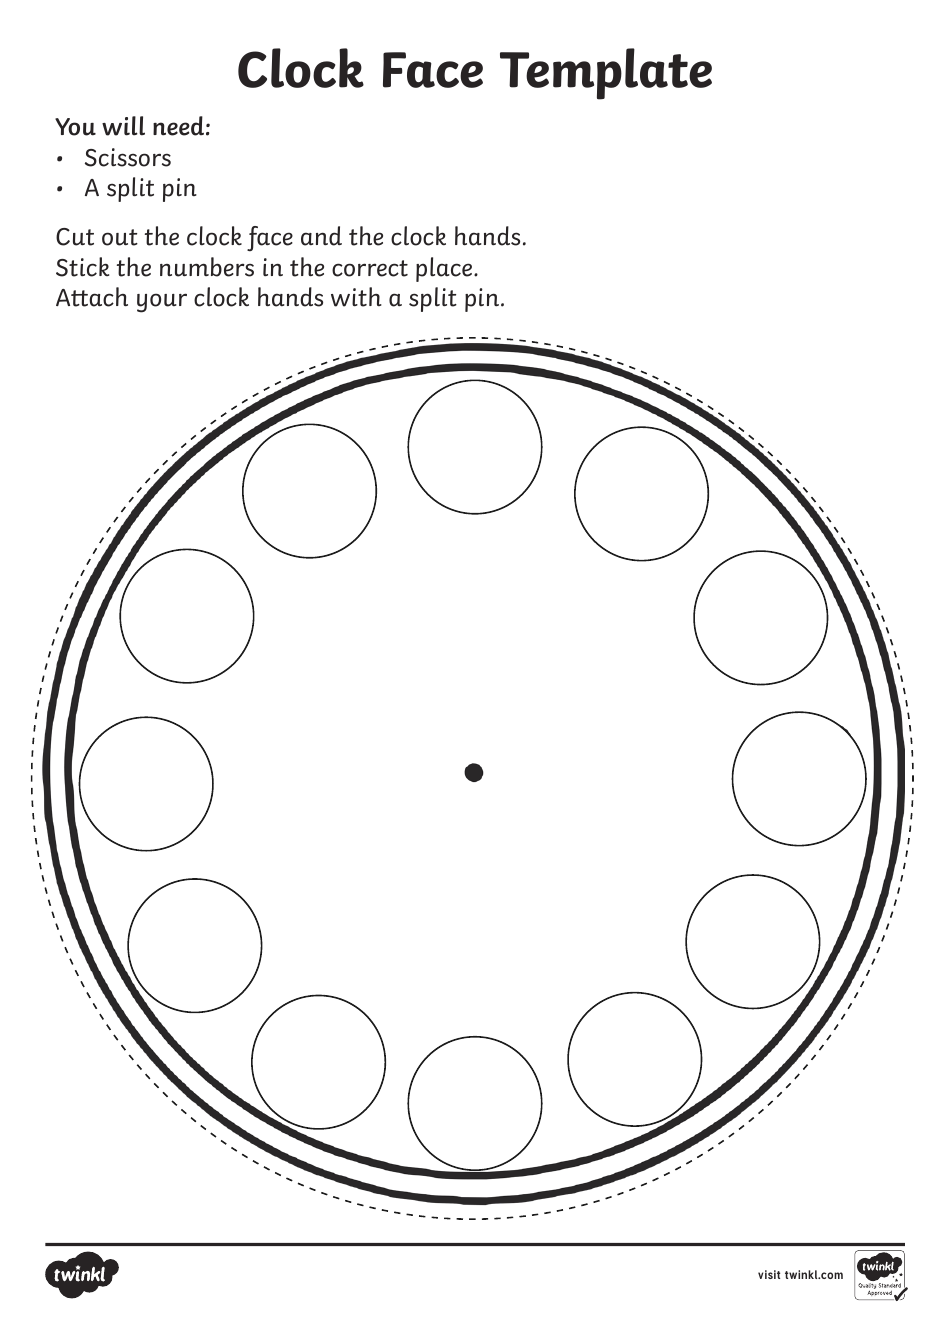 Clock Face Template - Black and White, Page 1